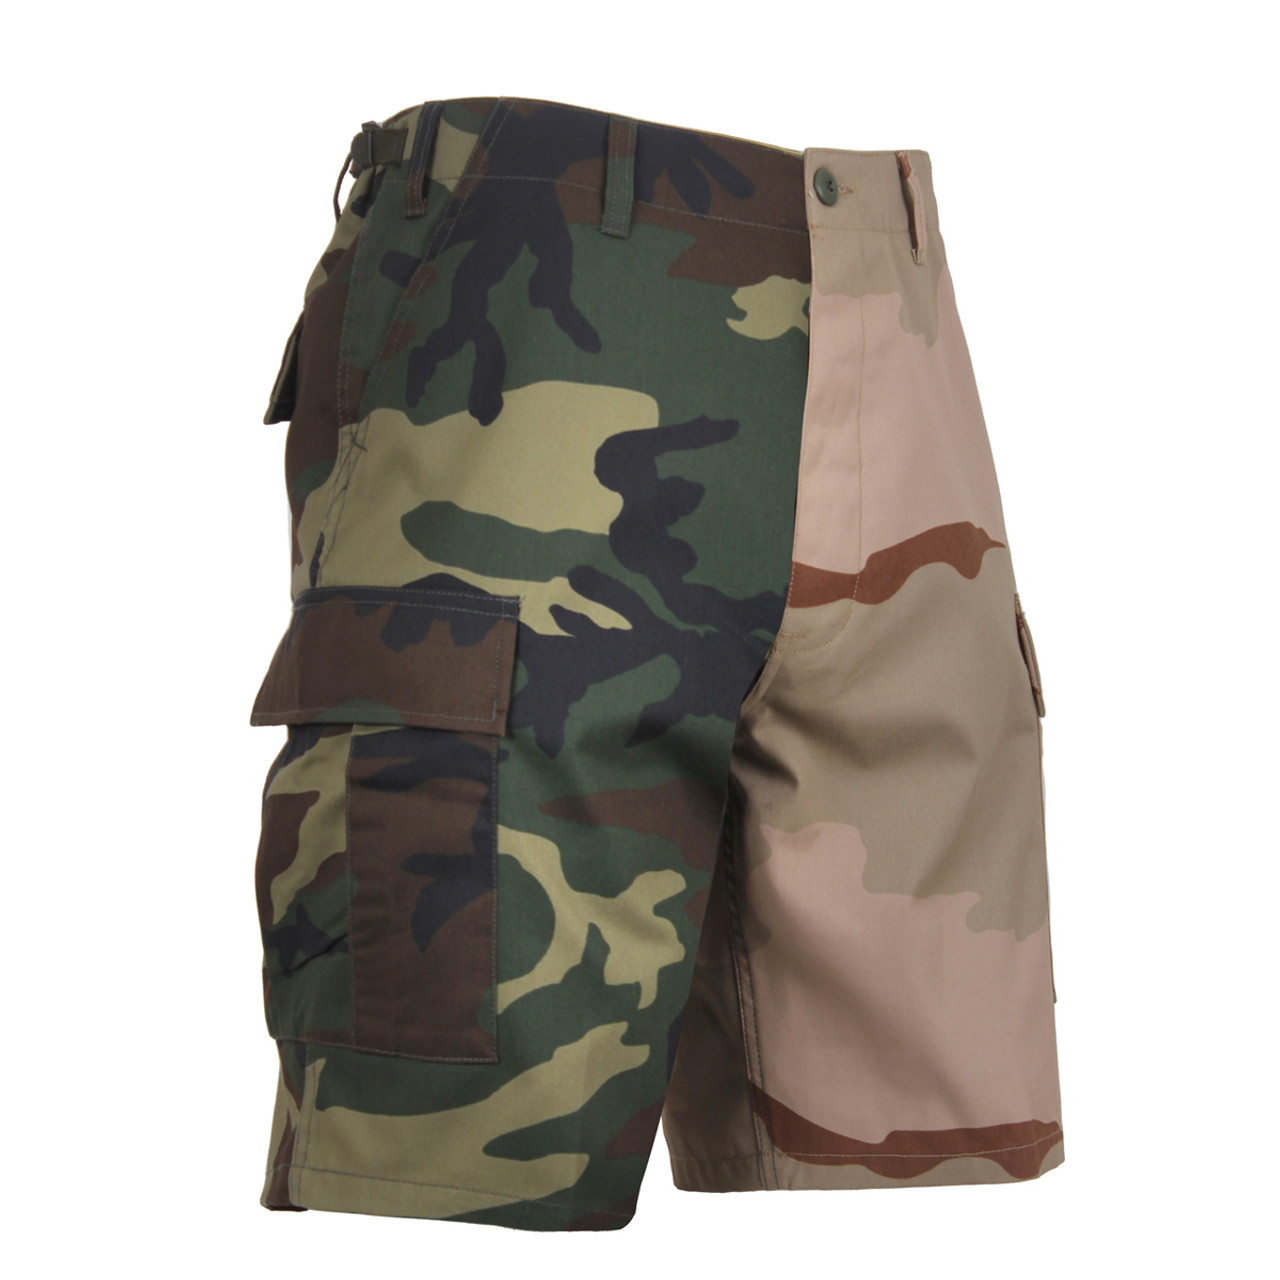 Shop Street Wear Two/Tone Camo Shorts - Fatigues Army Navy